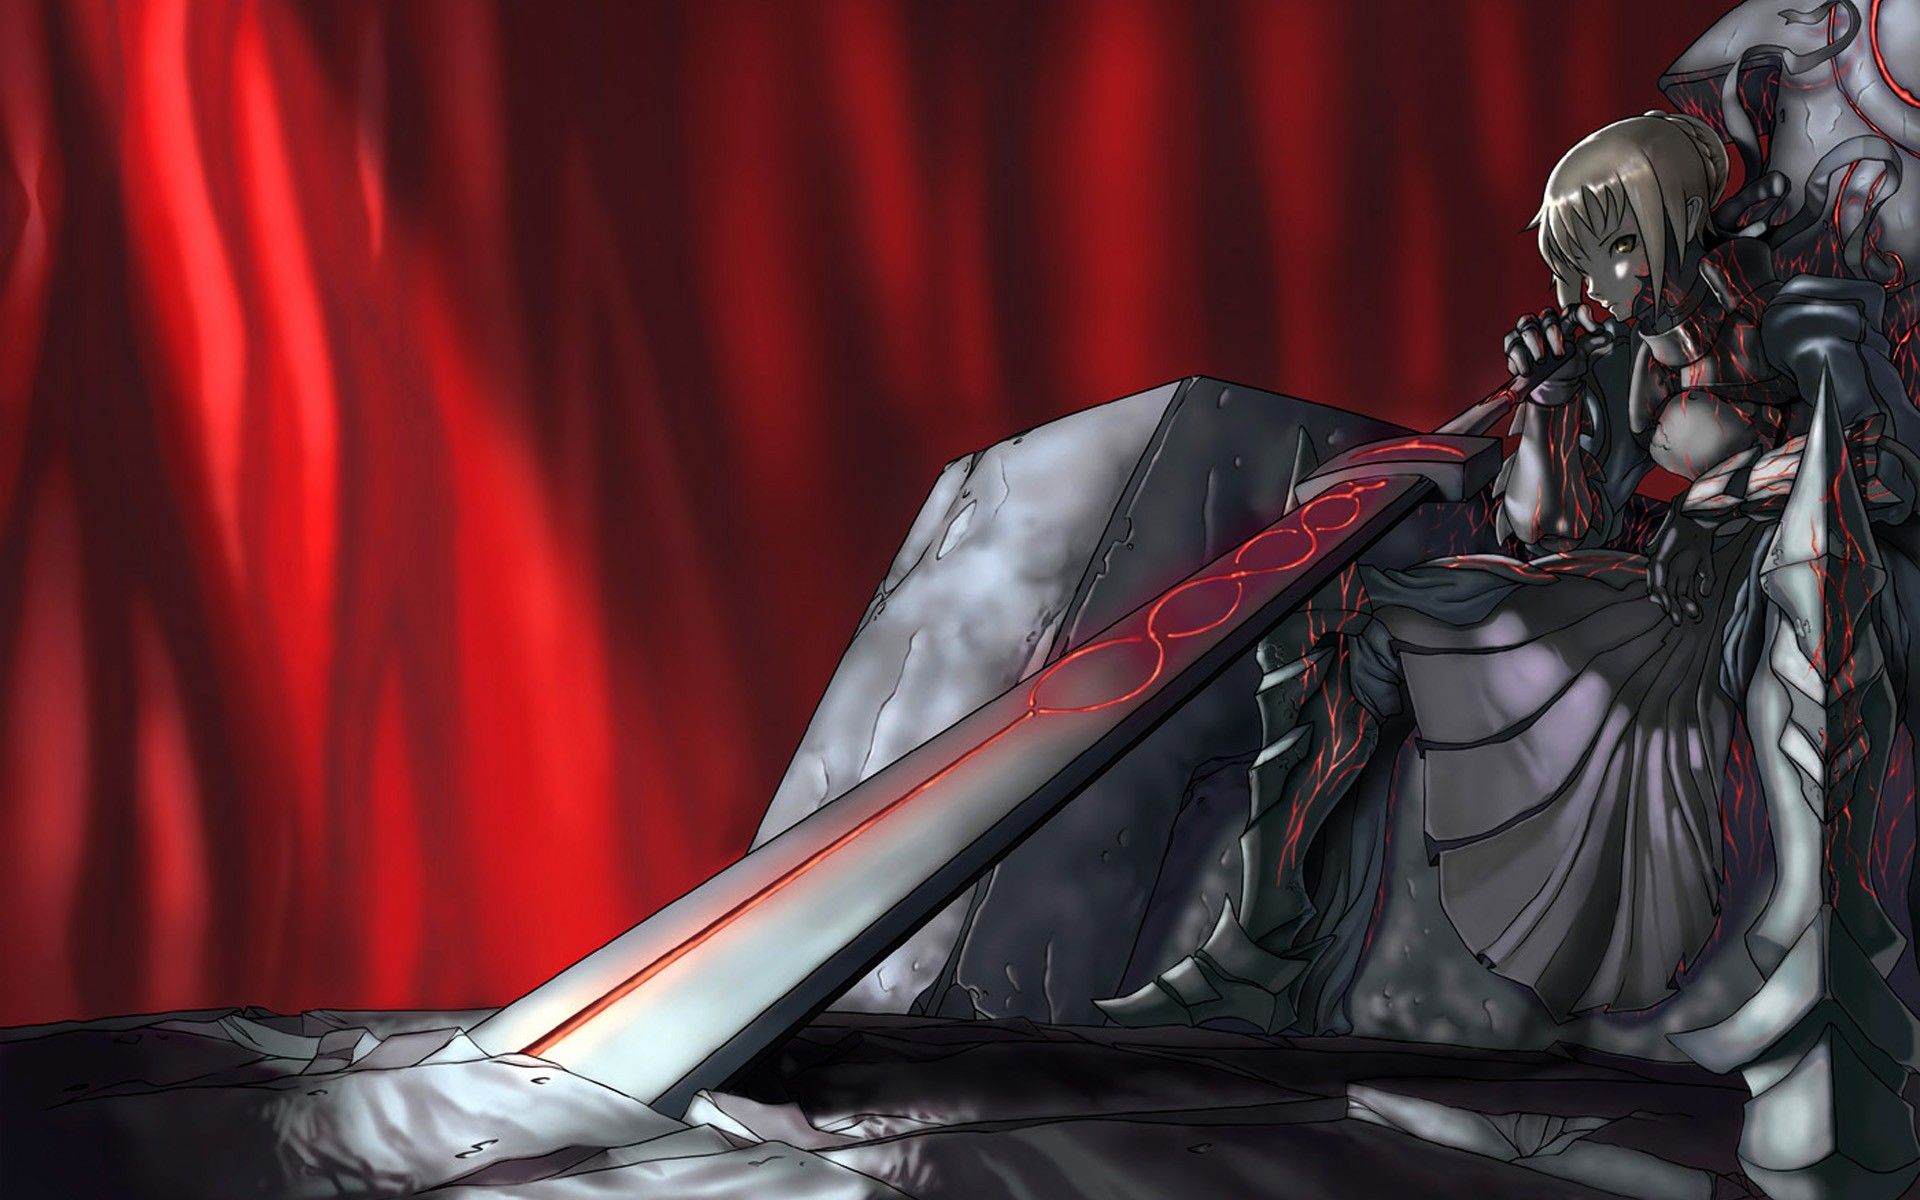 Fate Series, #Saber, #dark, #Saber Alter, #armor, #sword. Wallpaper No. 254189. Fate stay night movie, Fate stay night anime, Fate stay night